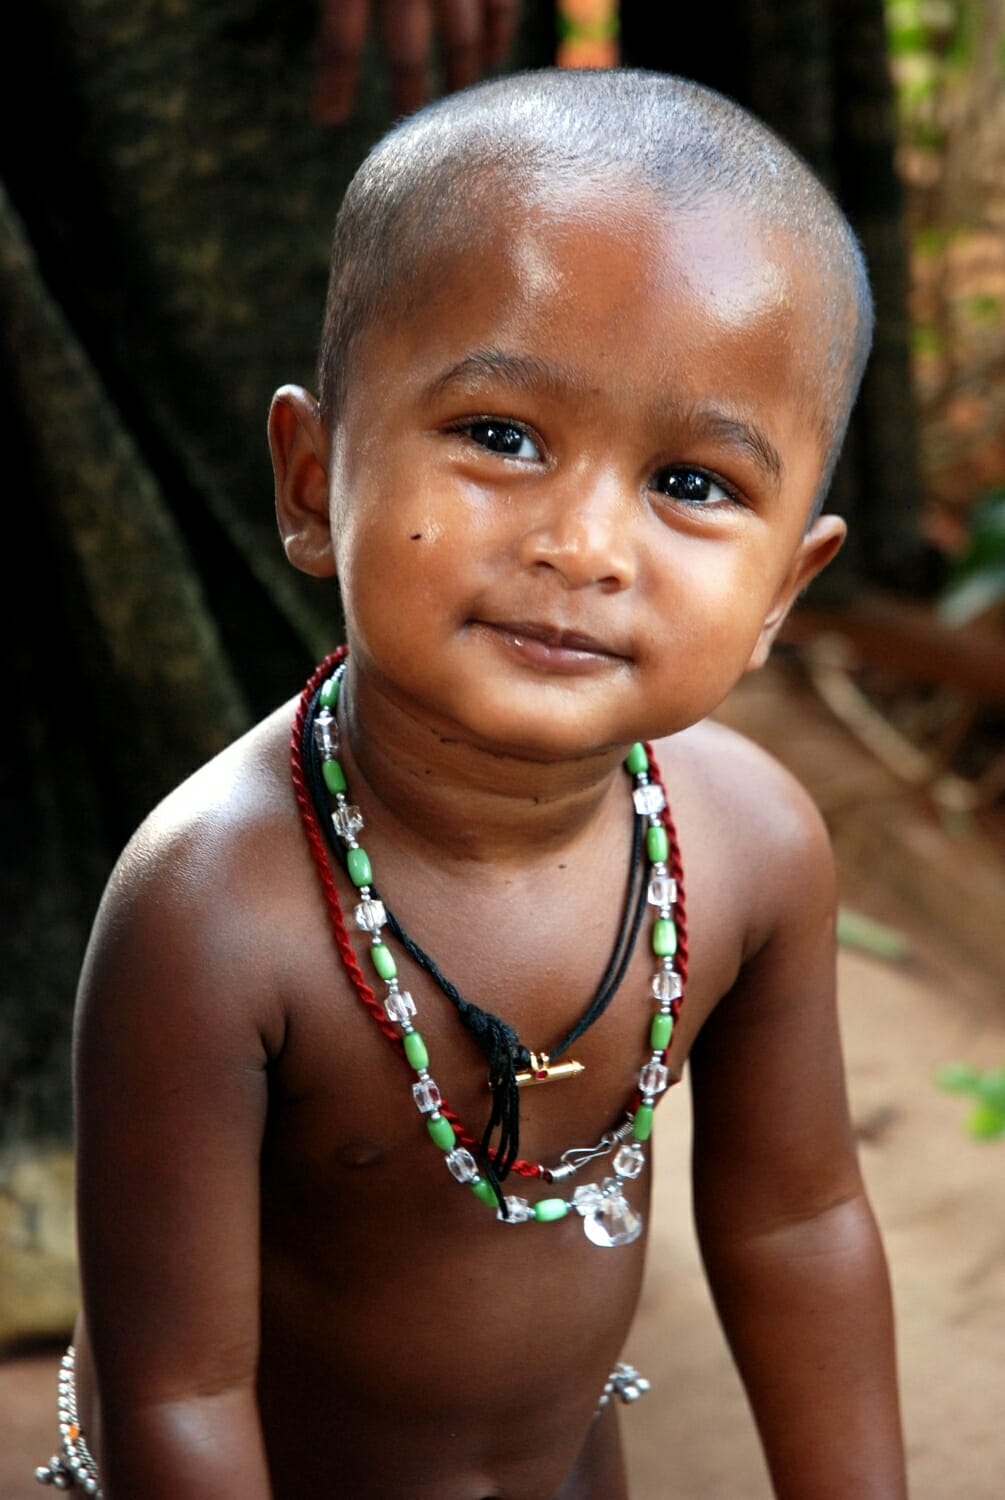 <span style="font-weight:normal;">Oily Baby, Tamil Nadu, 2012</span>